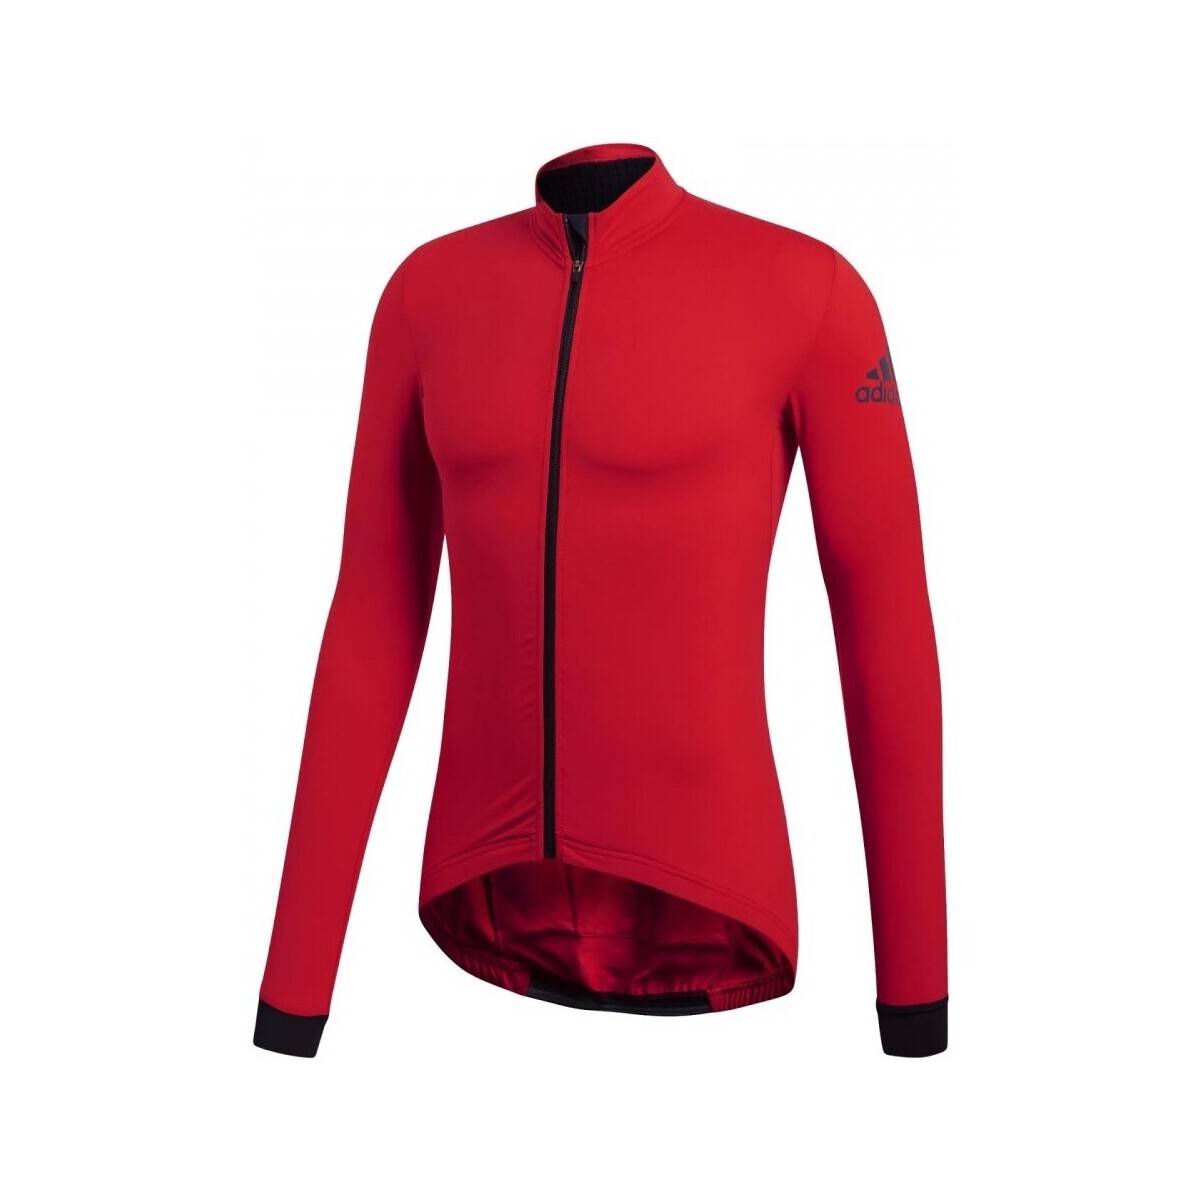 adidas Originals Rouge Climaheat Cycling Jersey qPY453Z